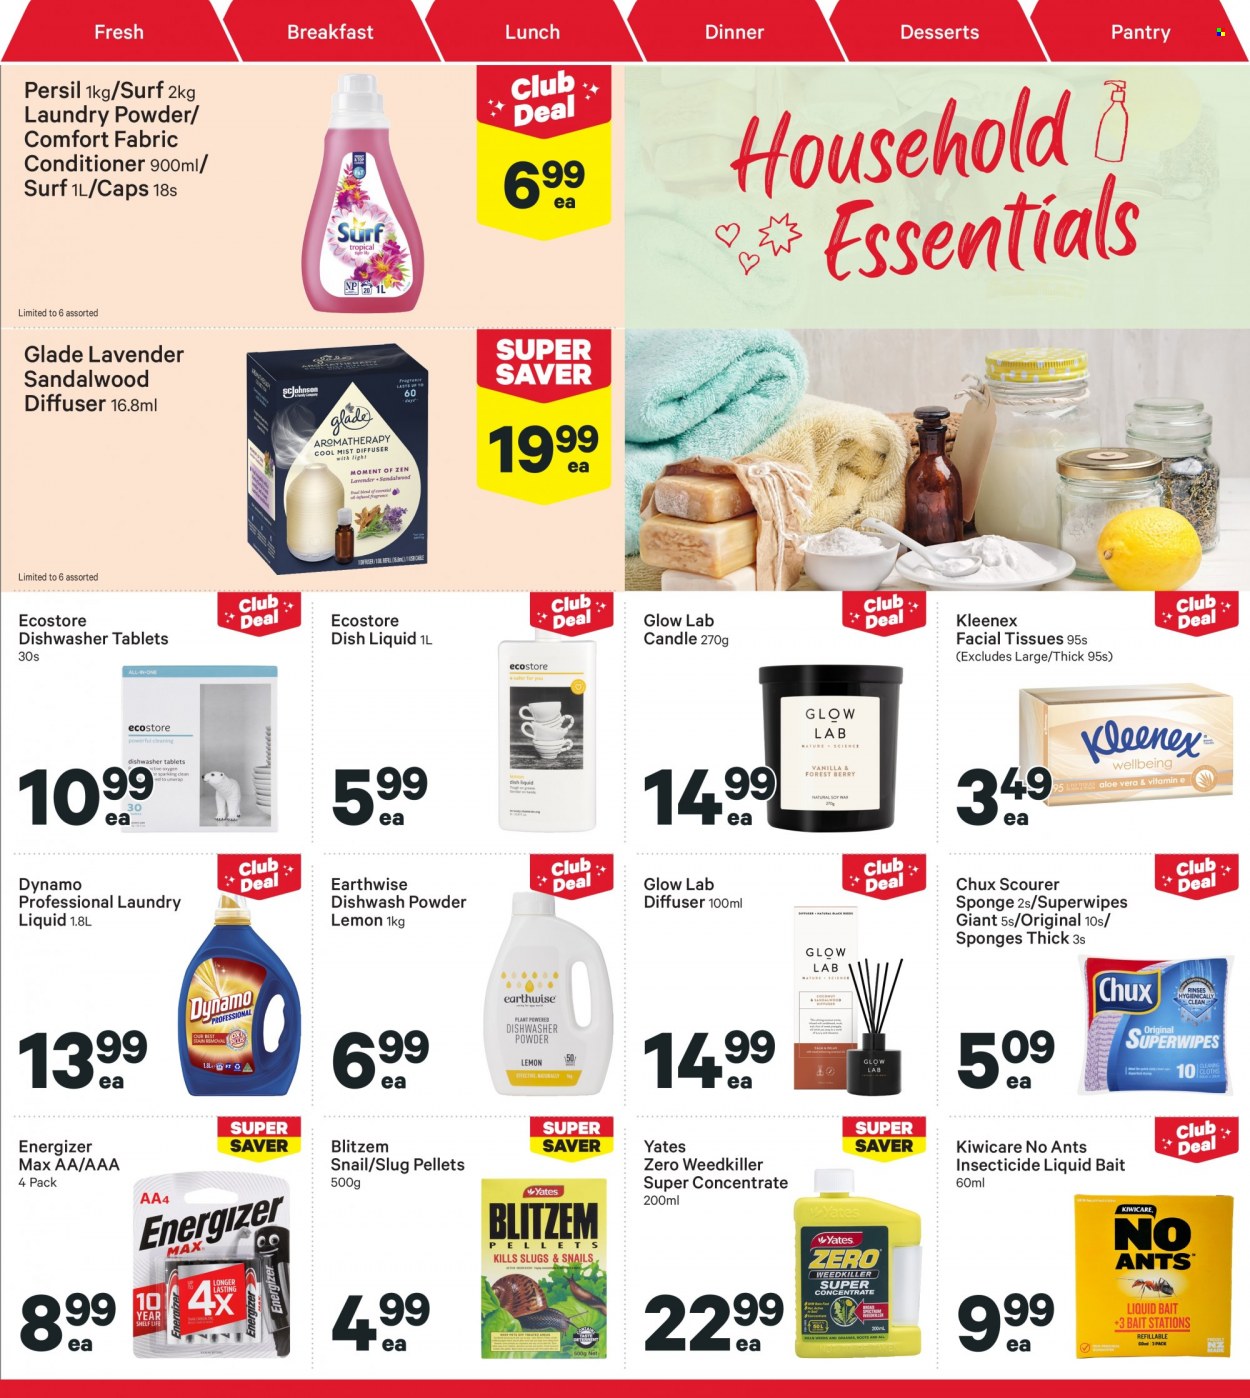 thumbnail - New World mailer - 06.02.2023 - 12.02.2023 - Sales products - Kleenex, tissues, Persil, laundry detergent, laundry powder, Surf, Comfort softener, dishwashing liquid, scourer, dishwasher cleaner, dishwasher tablets, facial tissues, insecticide, sponge, candle, diffuser, Glade, Energizer. Page 31.